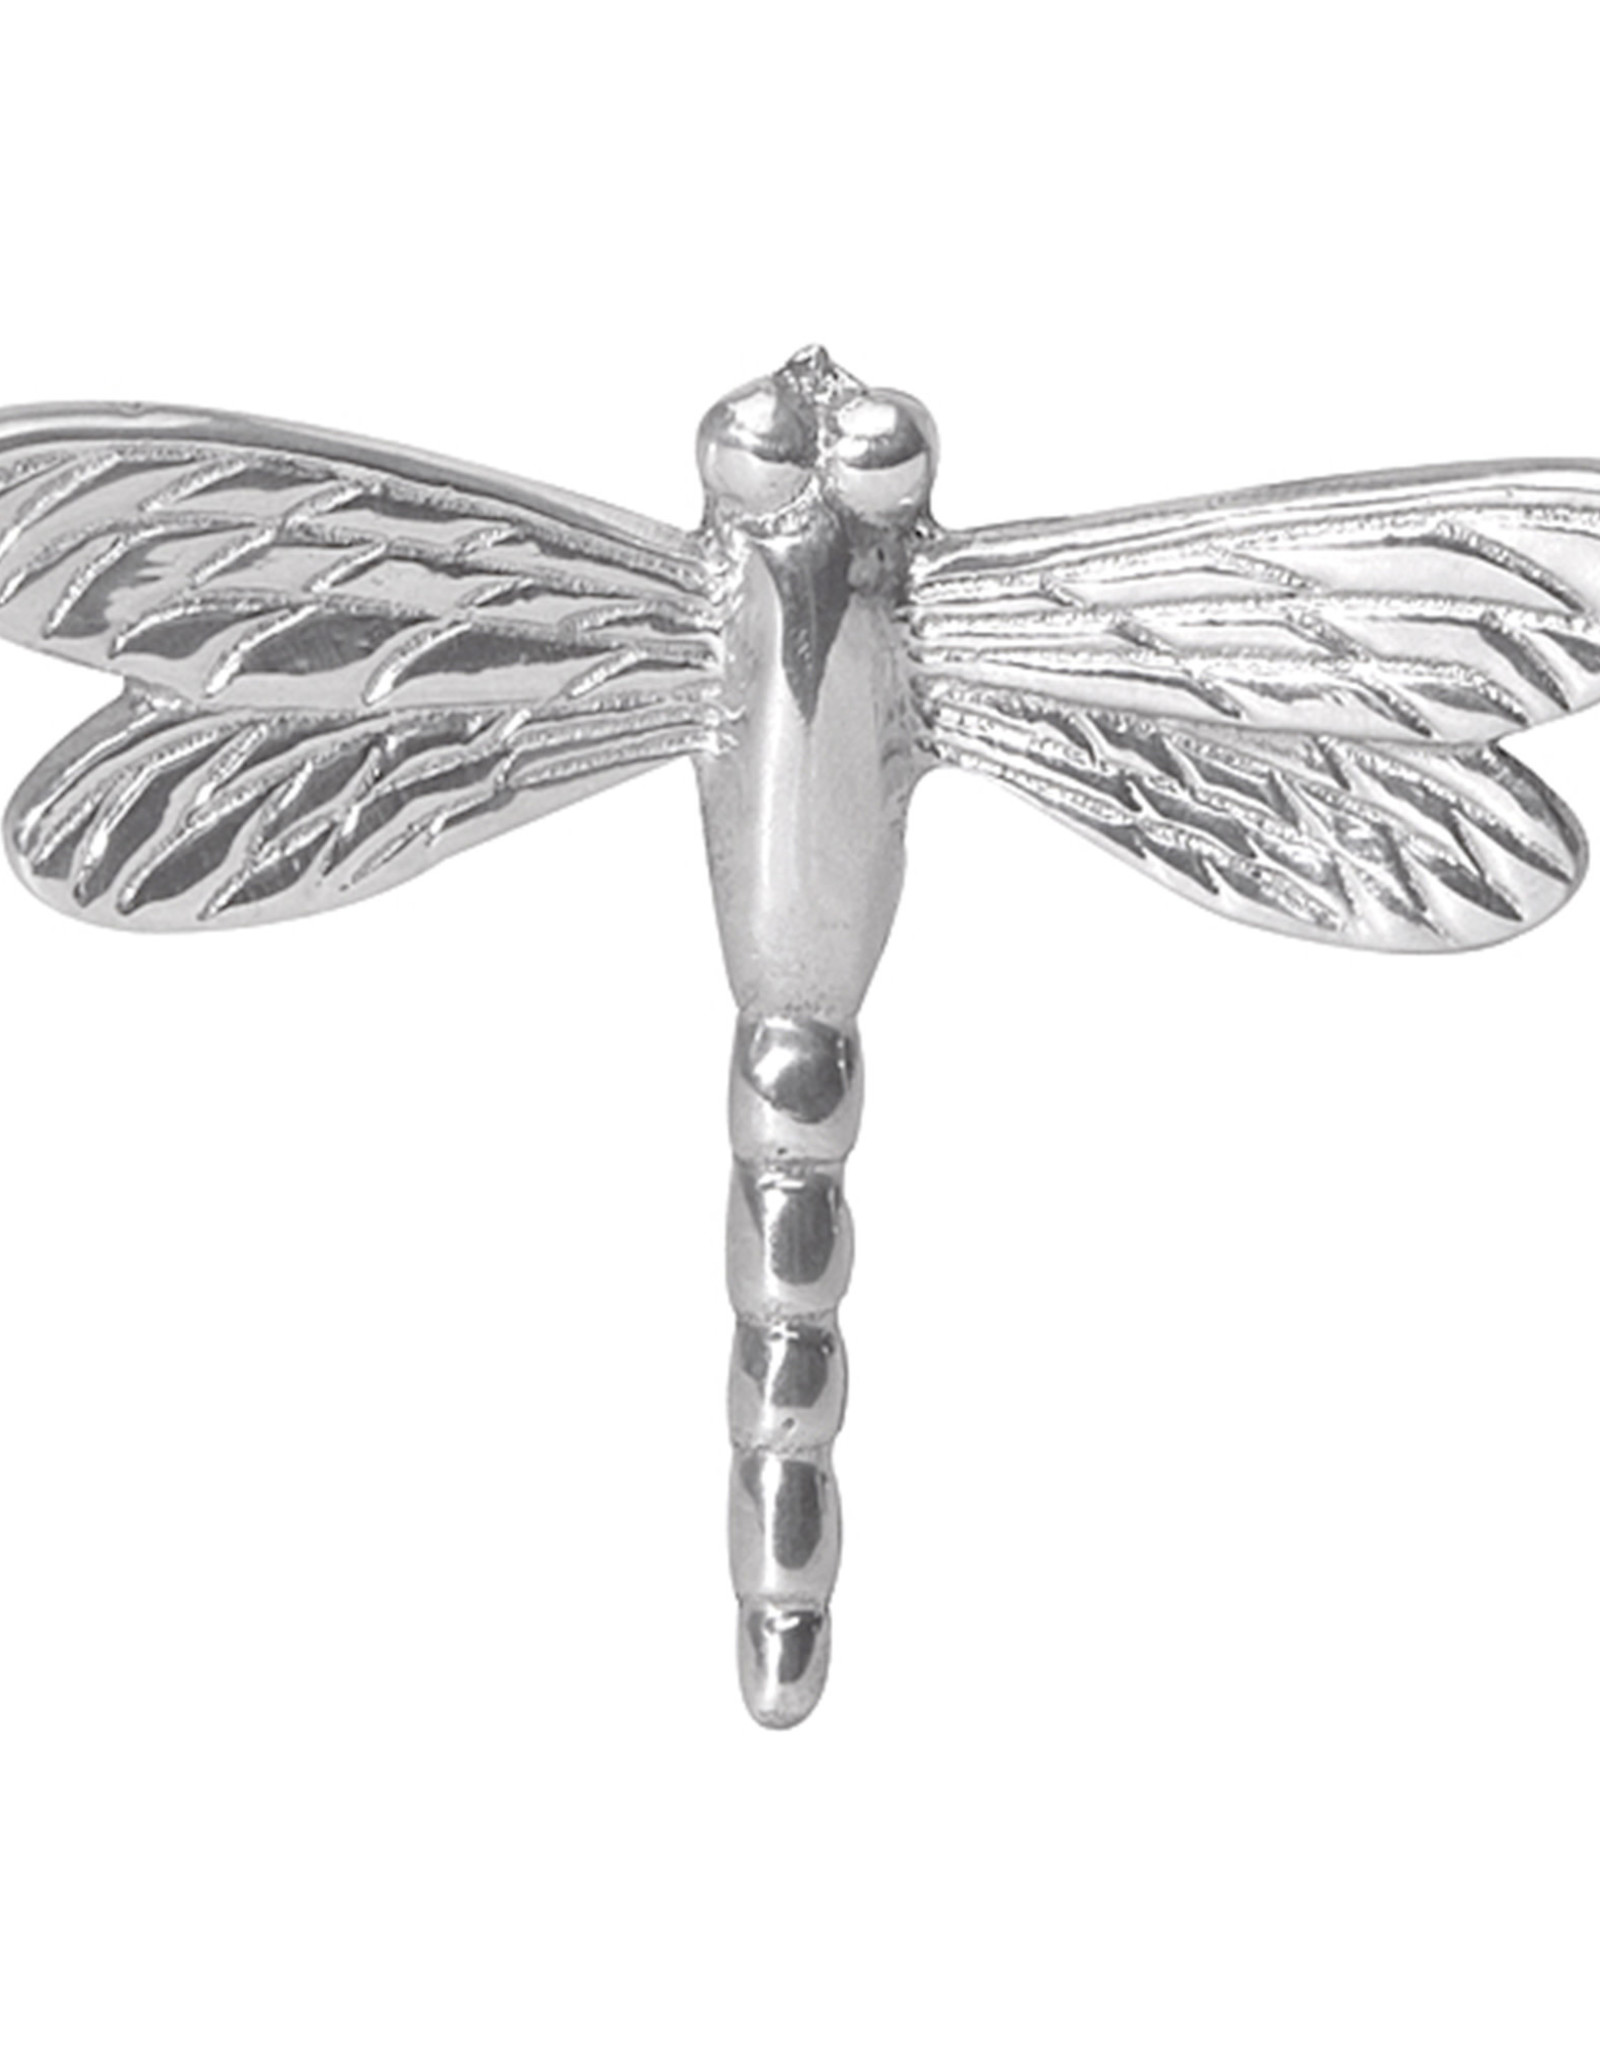 Mariposa Dragonfly Weight